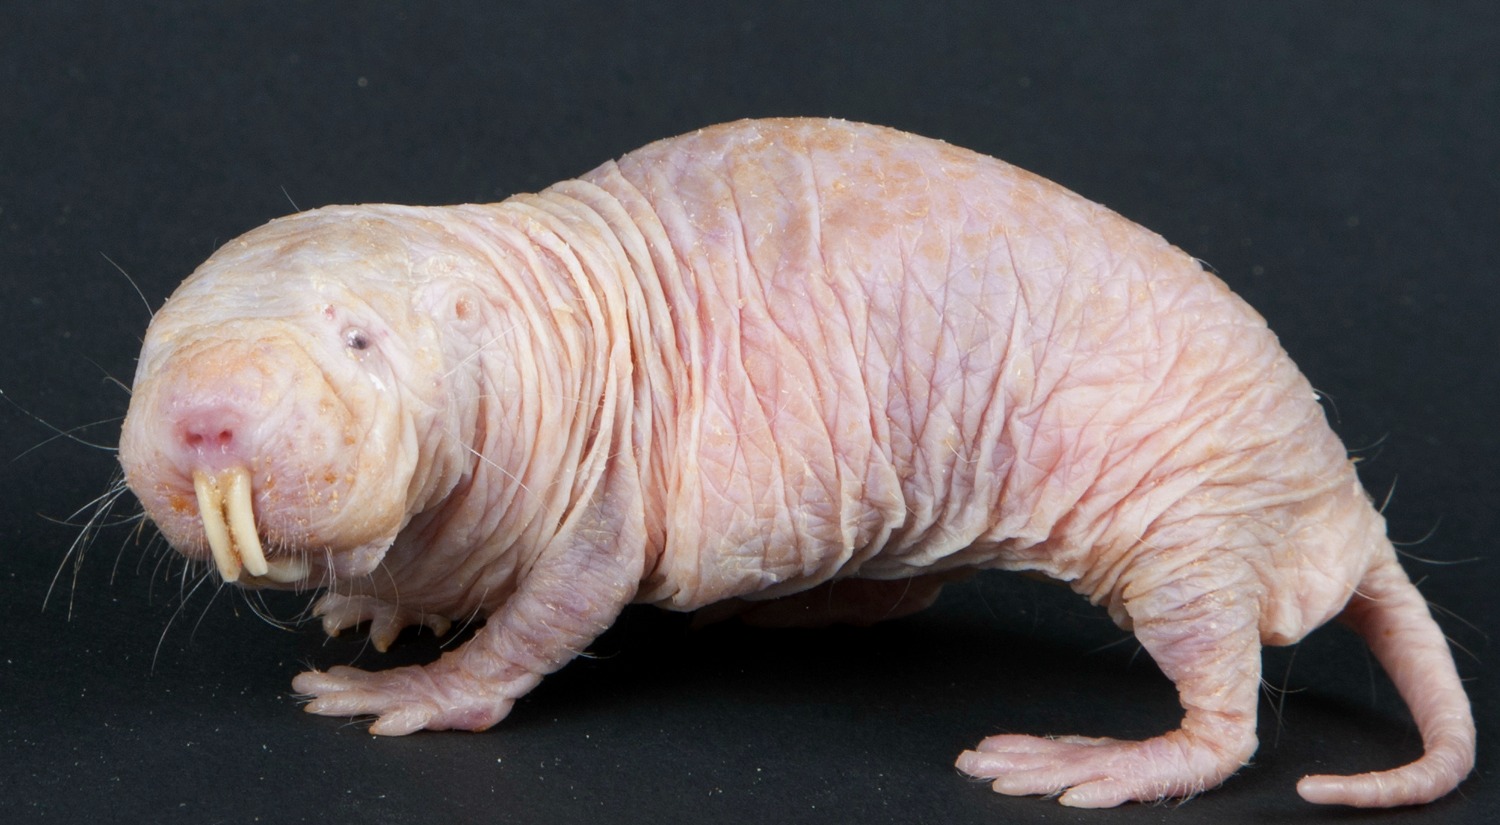 Naked Mole Rat. Credit: Smithsonian's National Zoo/flickr, CC BY-NC-ND